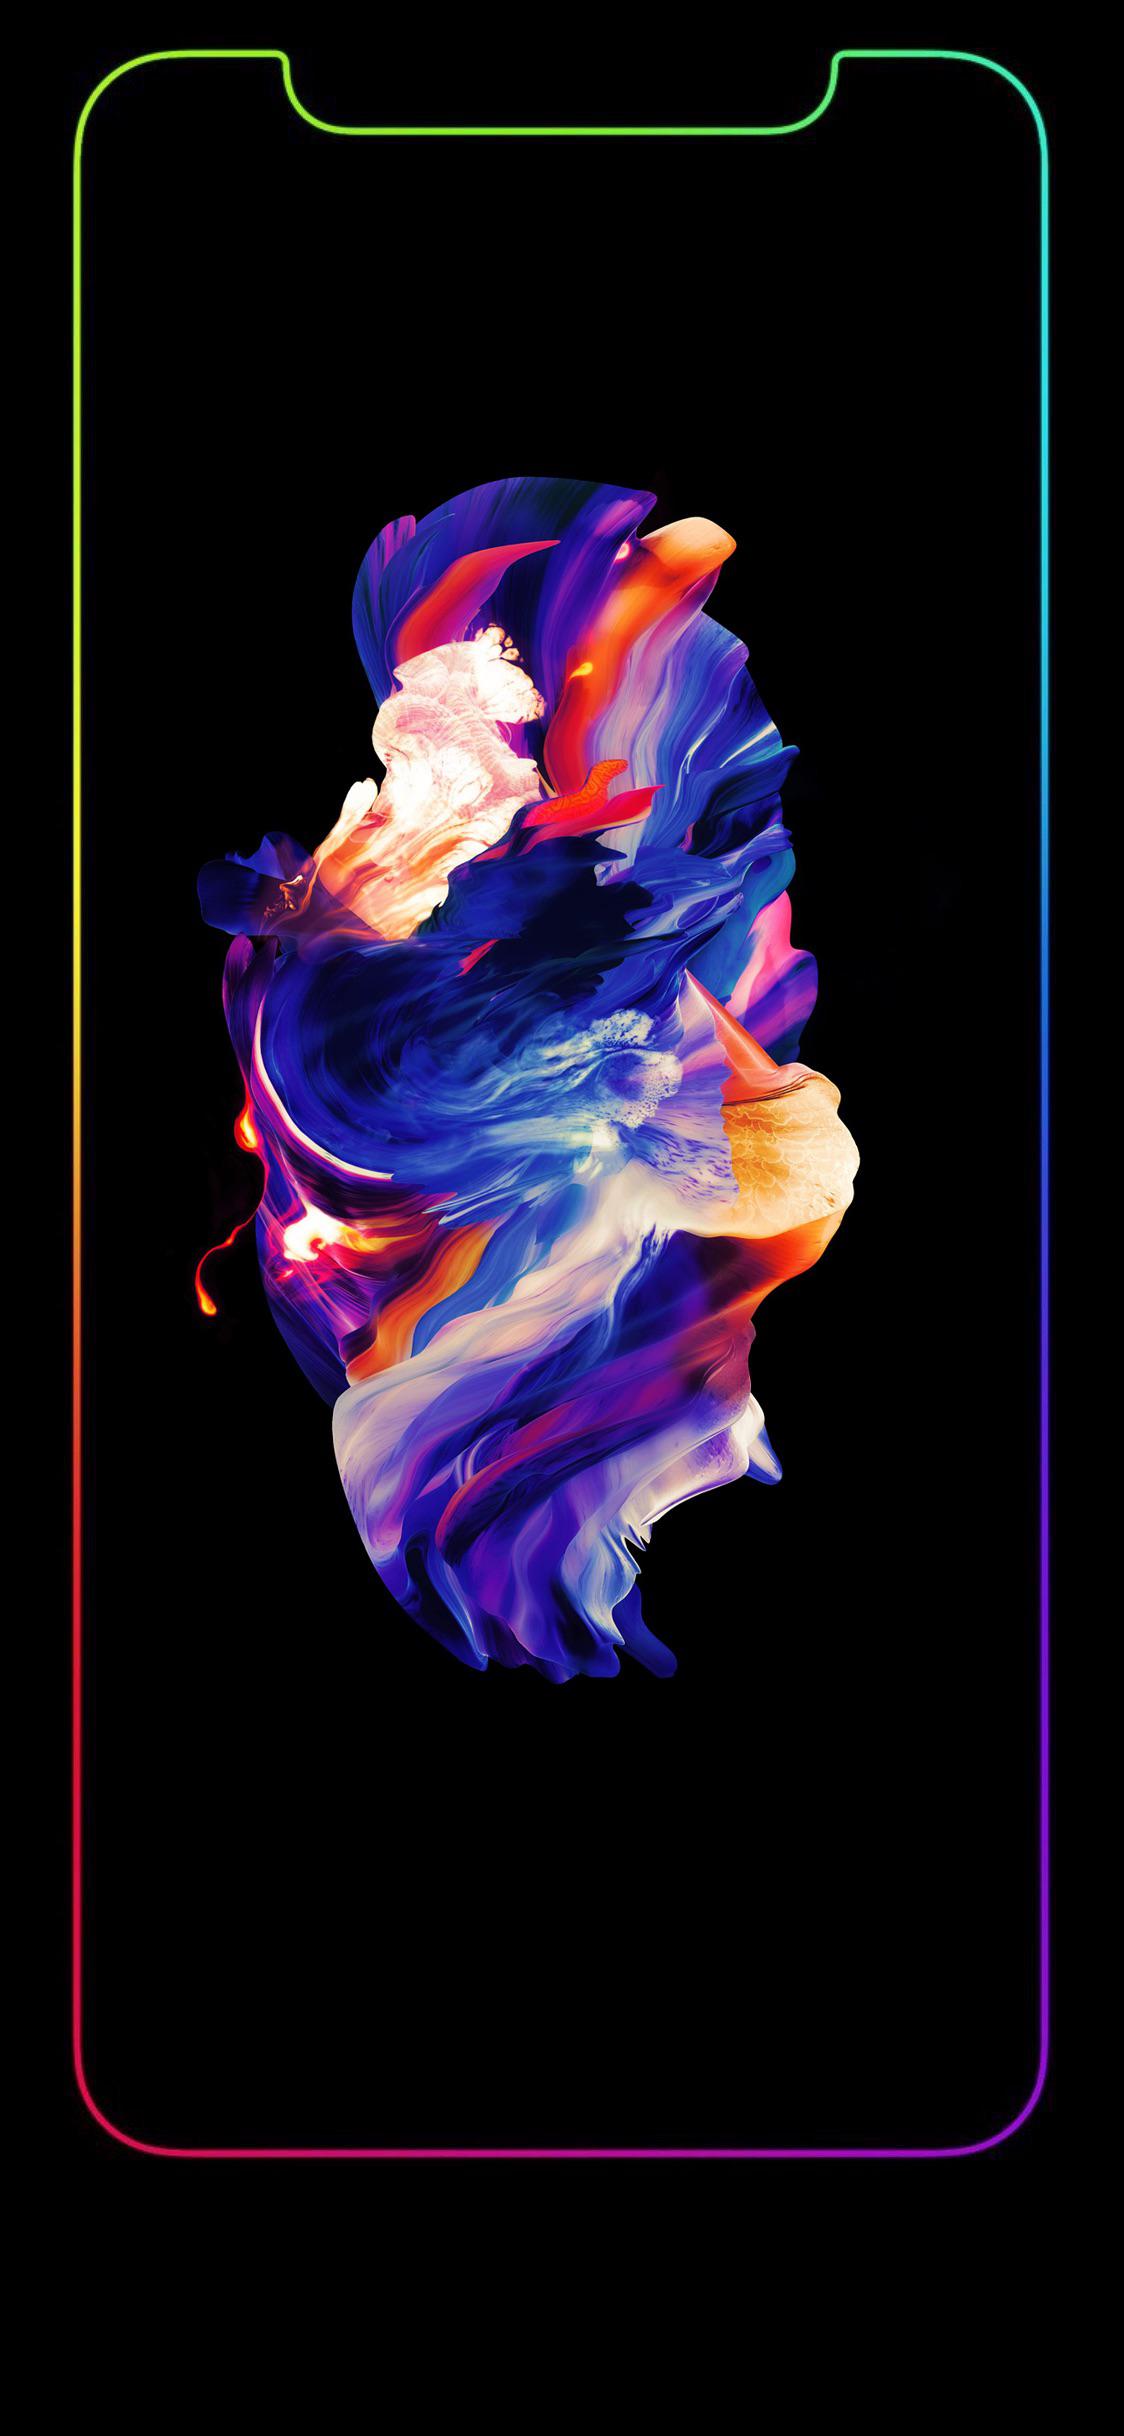 Put a frame on an oled wallpaper